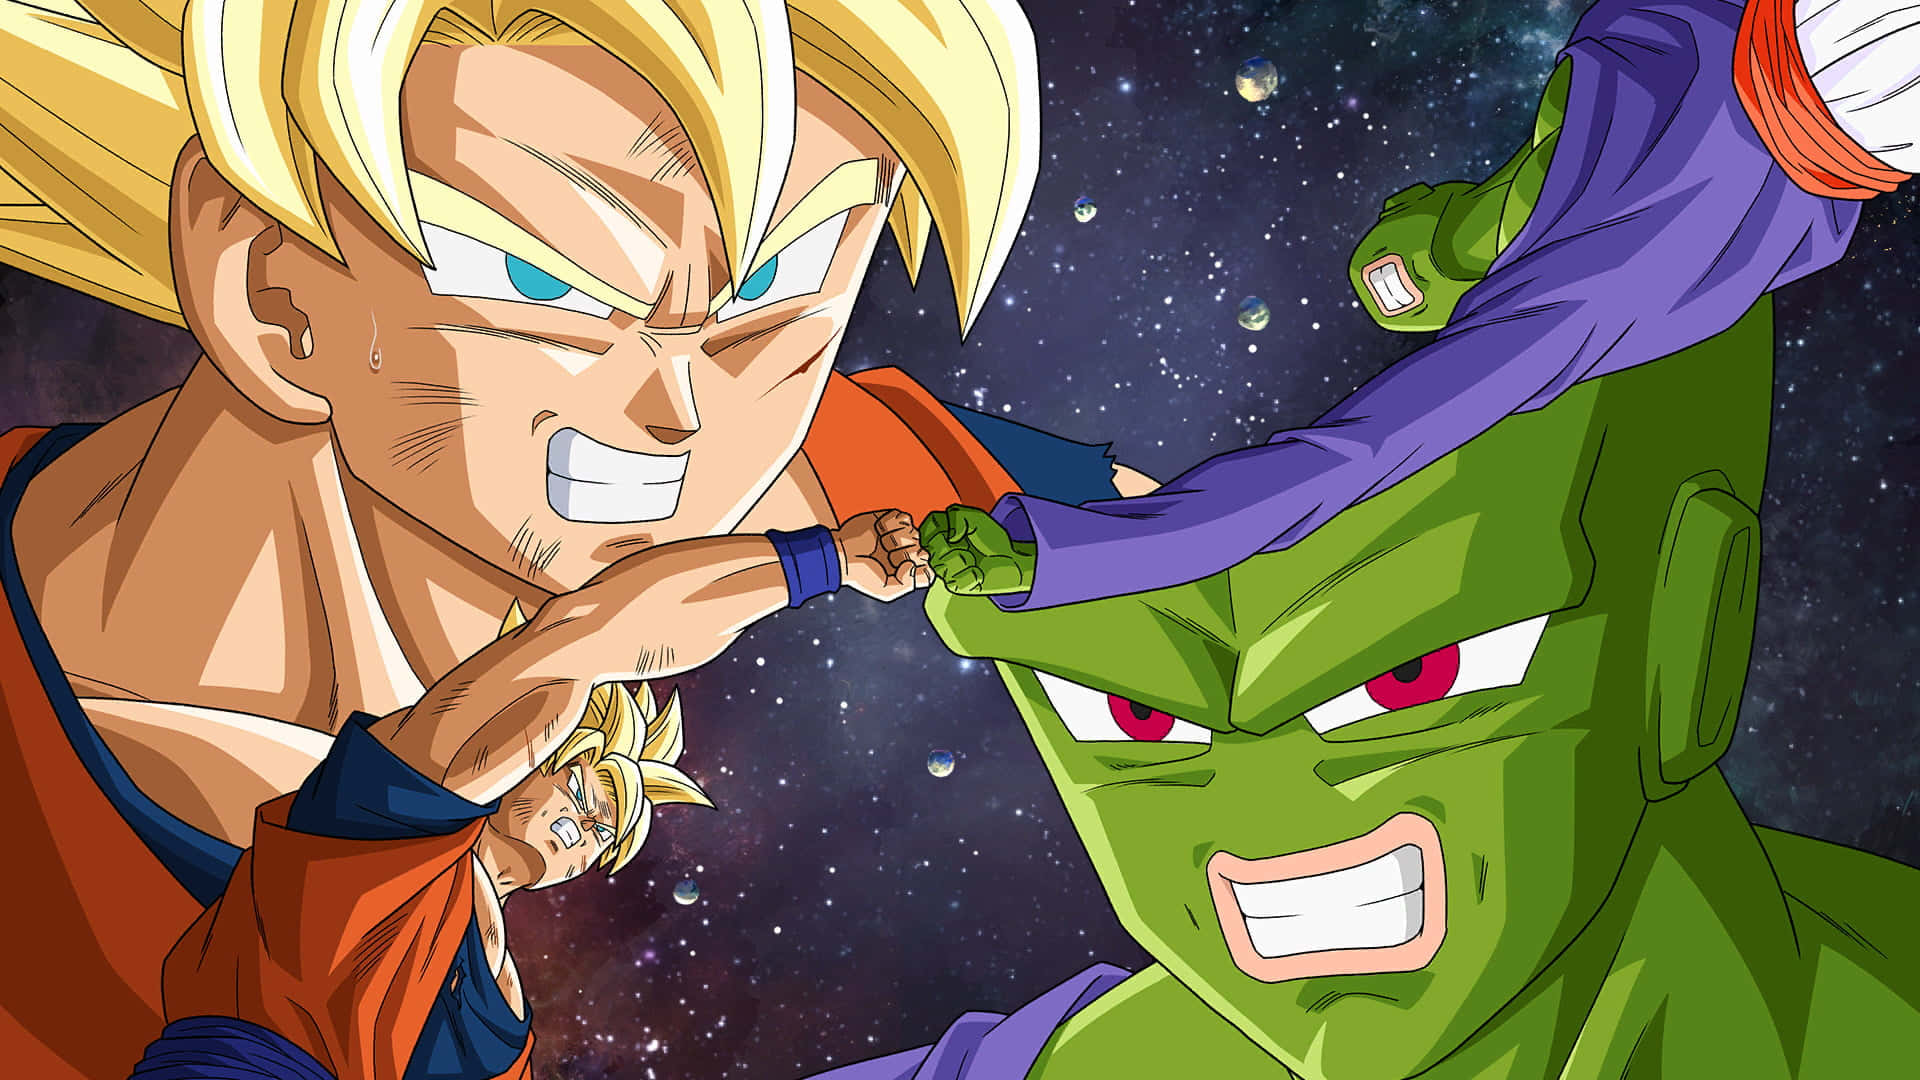 Enter the Dragon Ball Xenoverse&Experience New Dimensions of the Beloved Universe Wallpaper